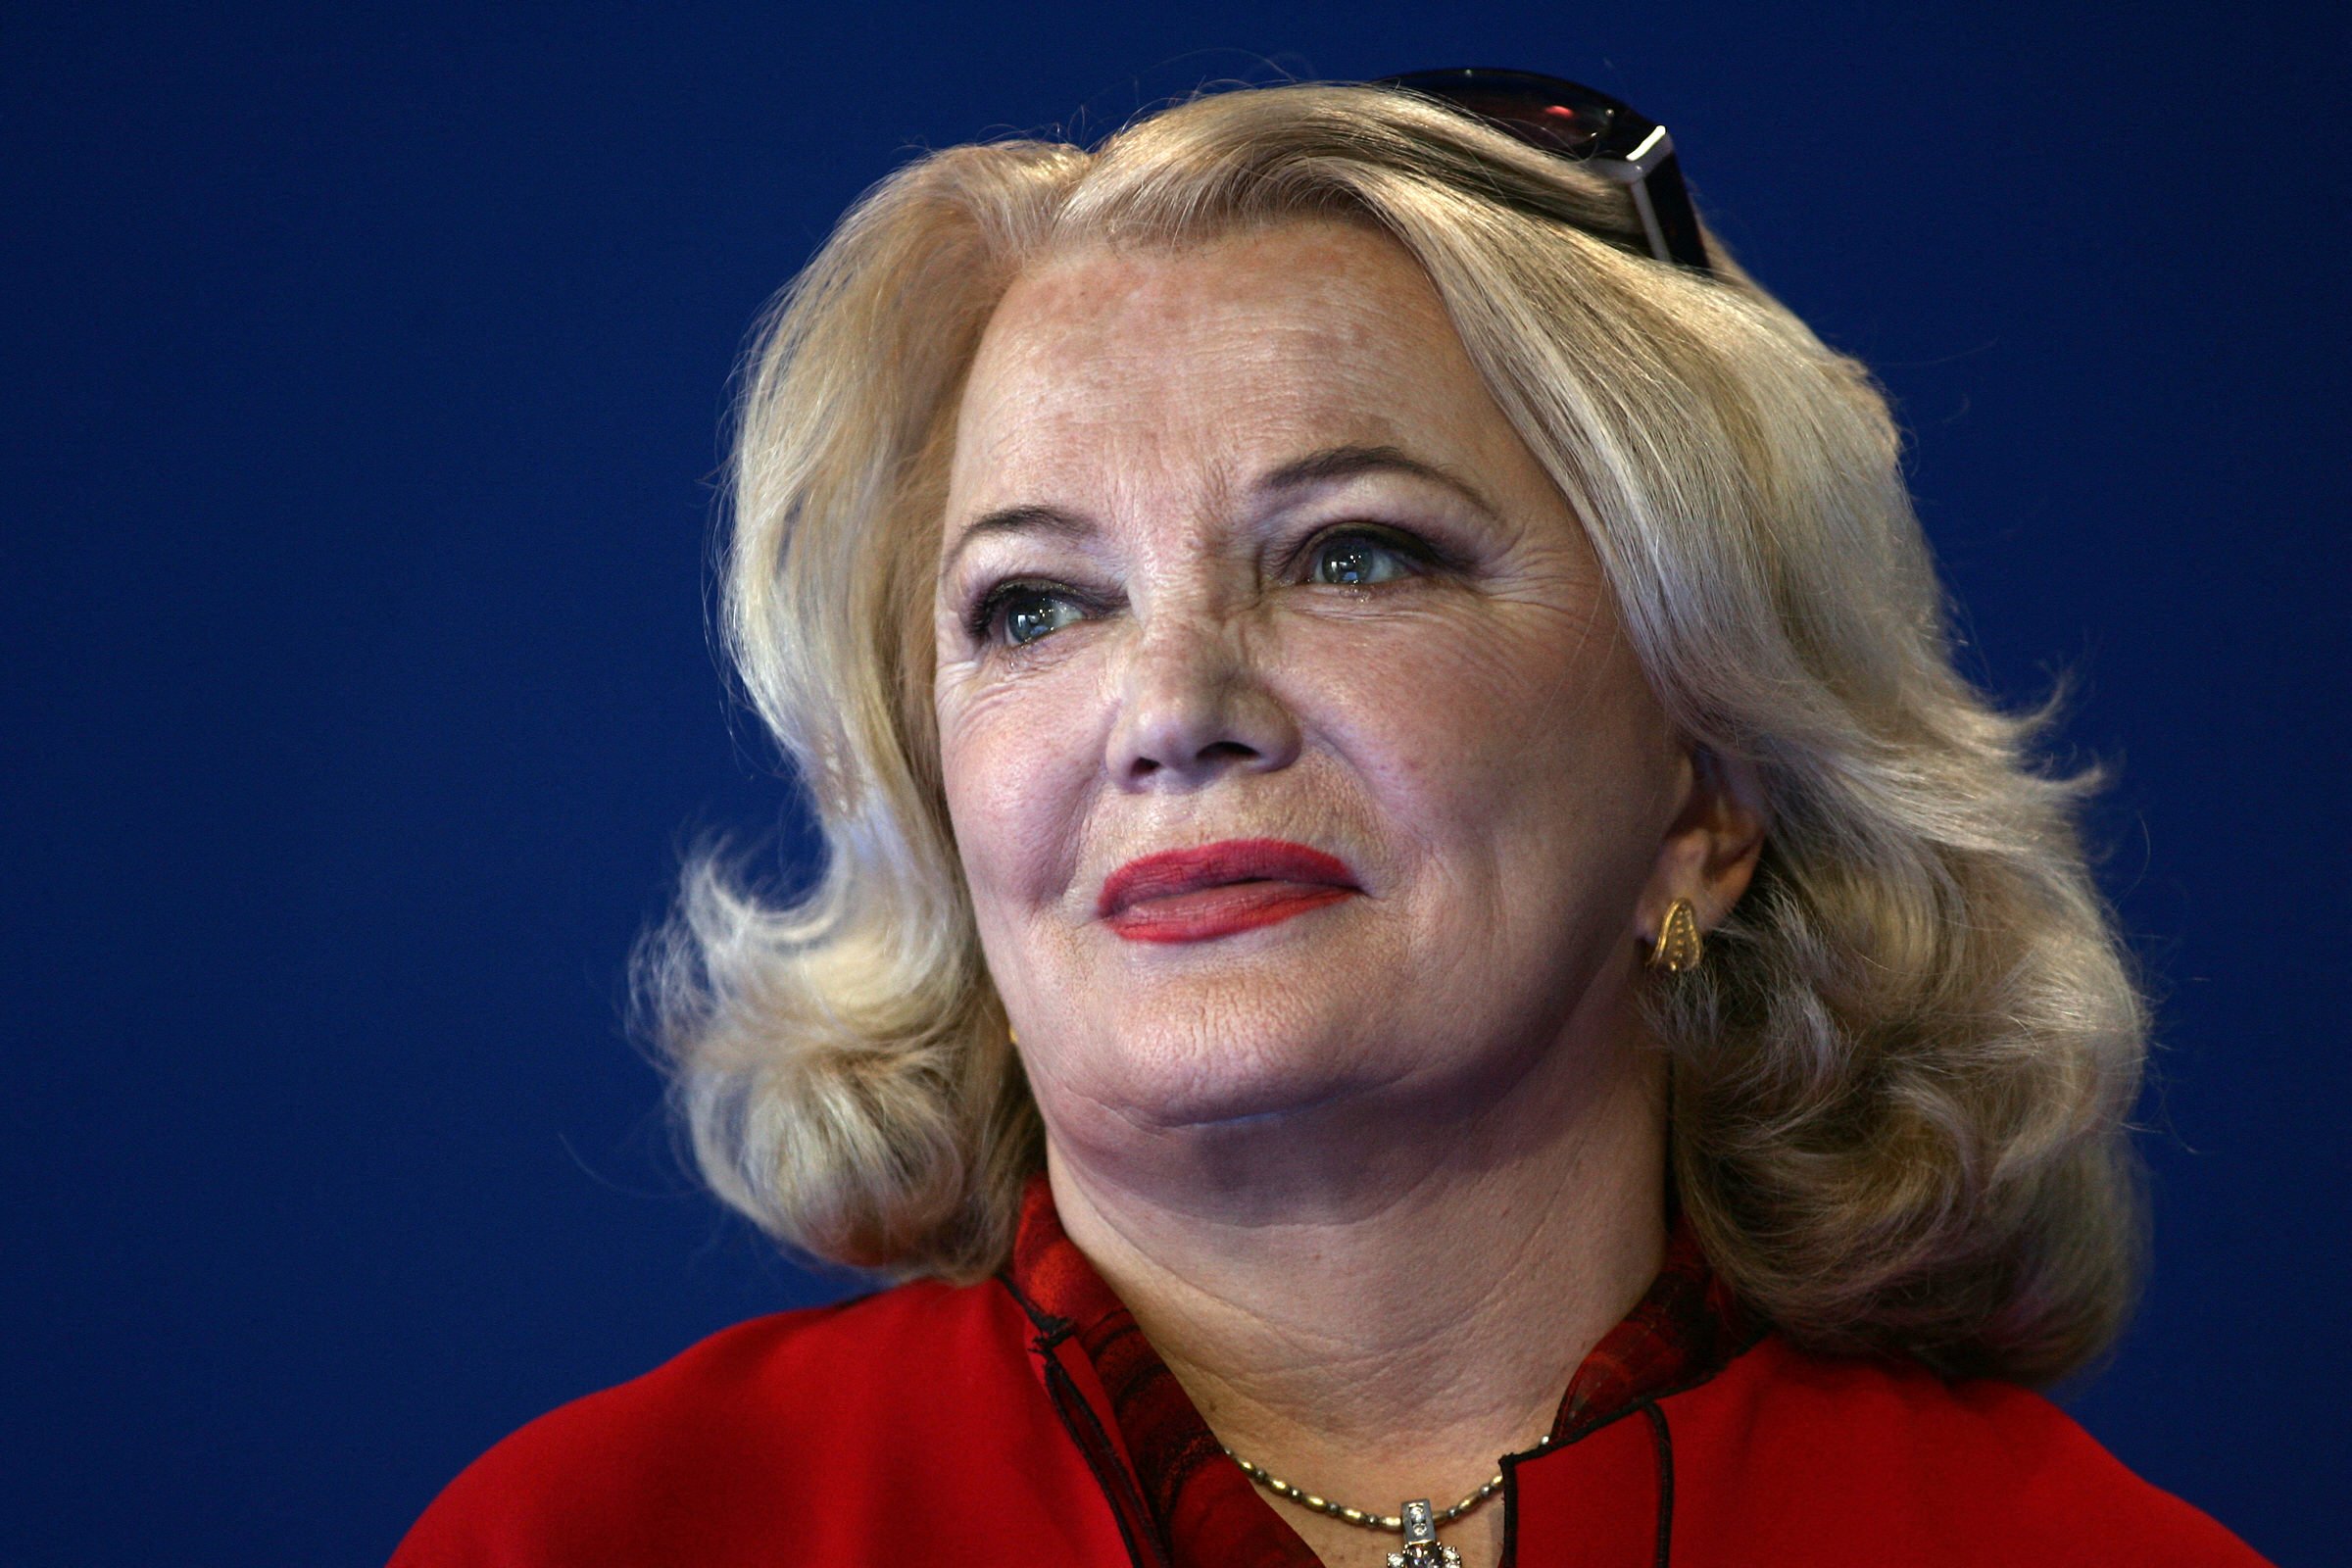 Gena Rowlands at a photocall for "The Notebook" in 2004 | Source: Getty Images